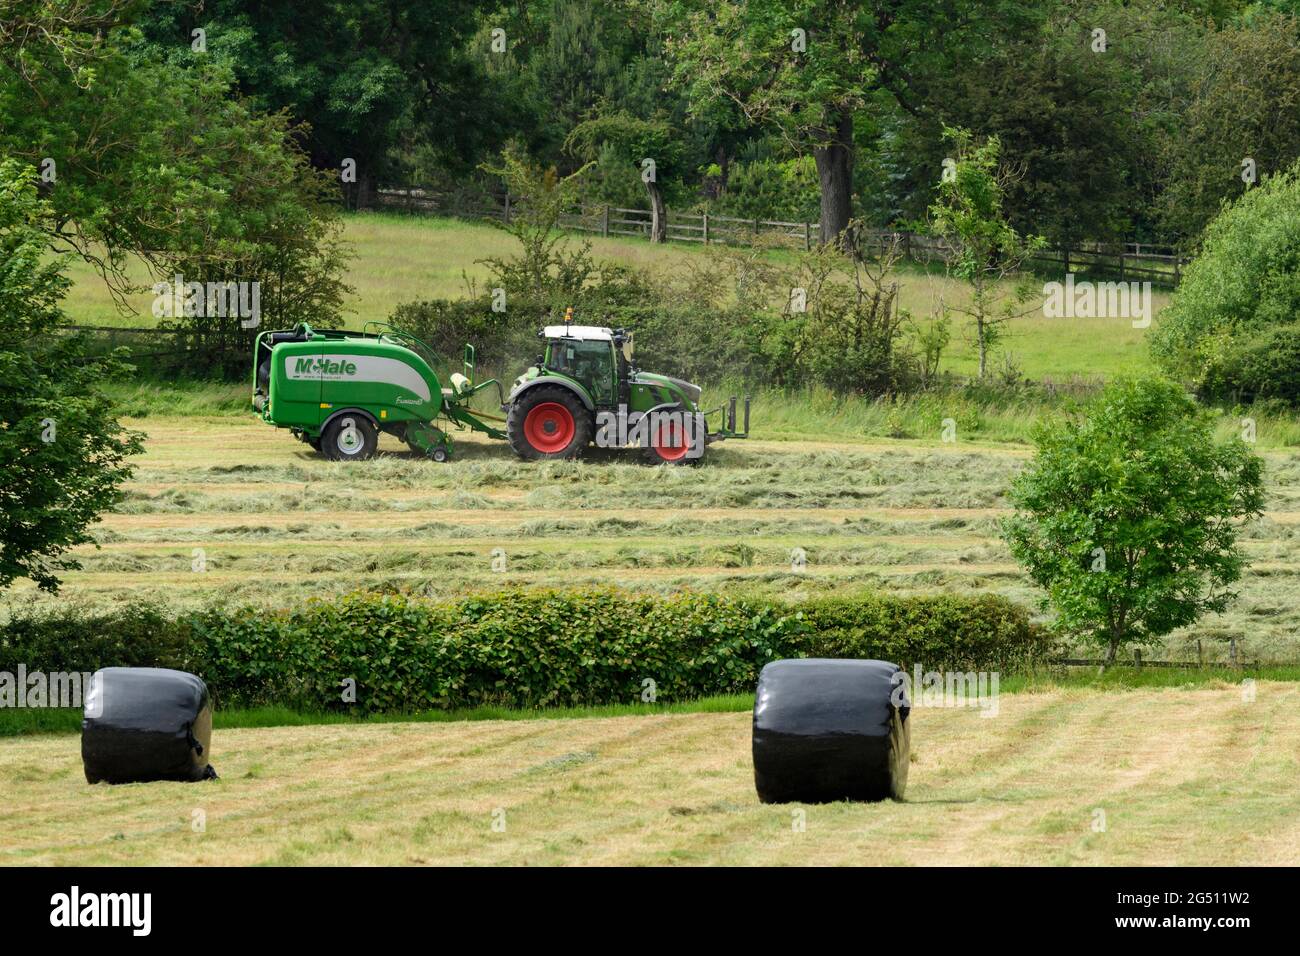 Hay or silage making (farmer in farm tractor at work in rural field pulling baler, collecting dry grass & round bales wrapped - Yorkshire England, UK. Stock Photo